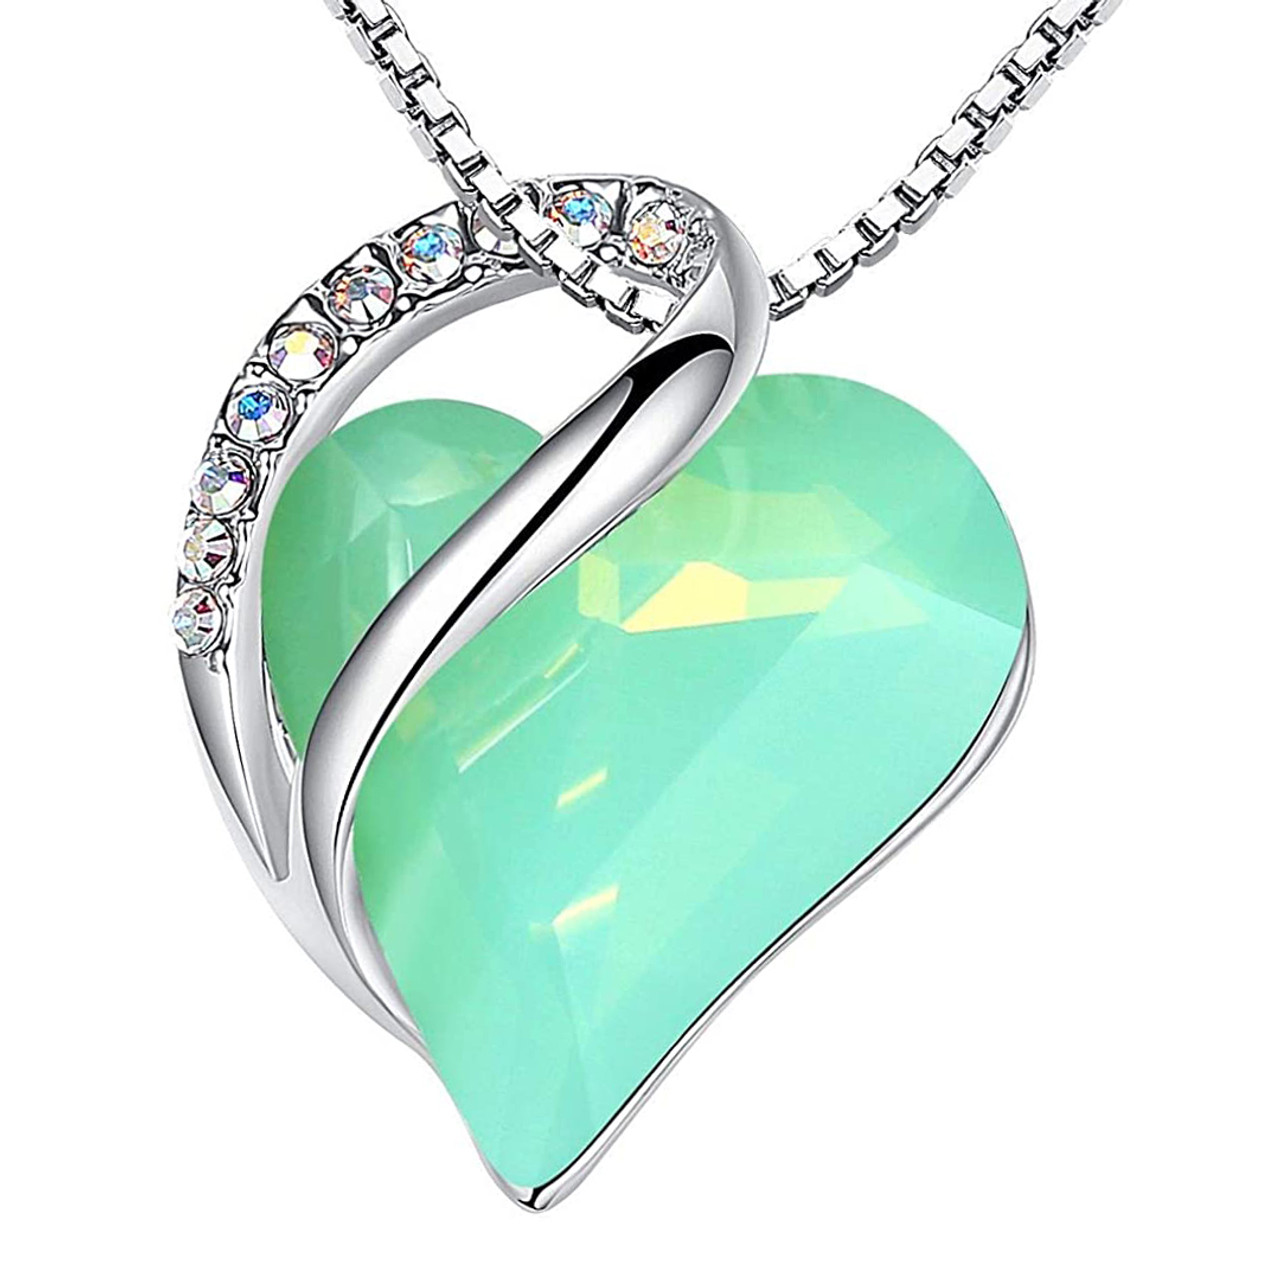 Lucky Green Jade Gem - Looped Heart Design Crystal Pendant and CZ stones - with 18" Chain Necklace. Gift for Lover, Girl Friend, Wife, Valentine's Day Gift, Mother's Day, Anniversary Gift Heart Necklace.